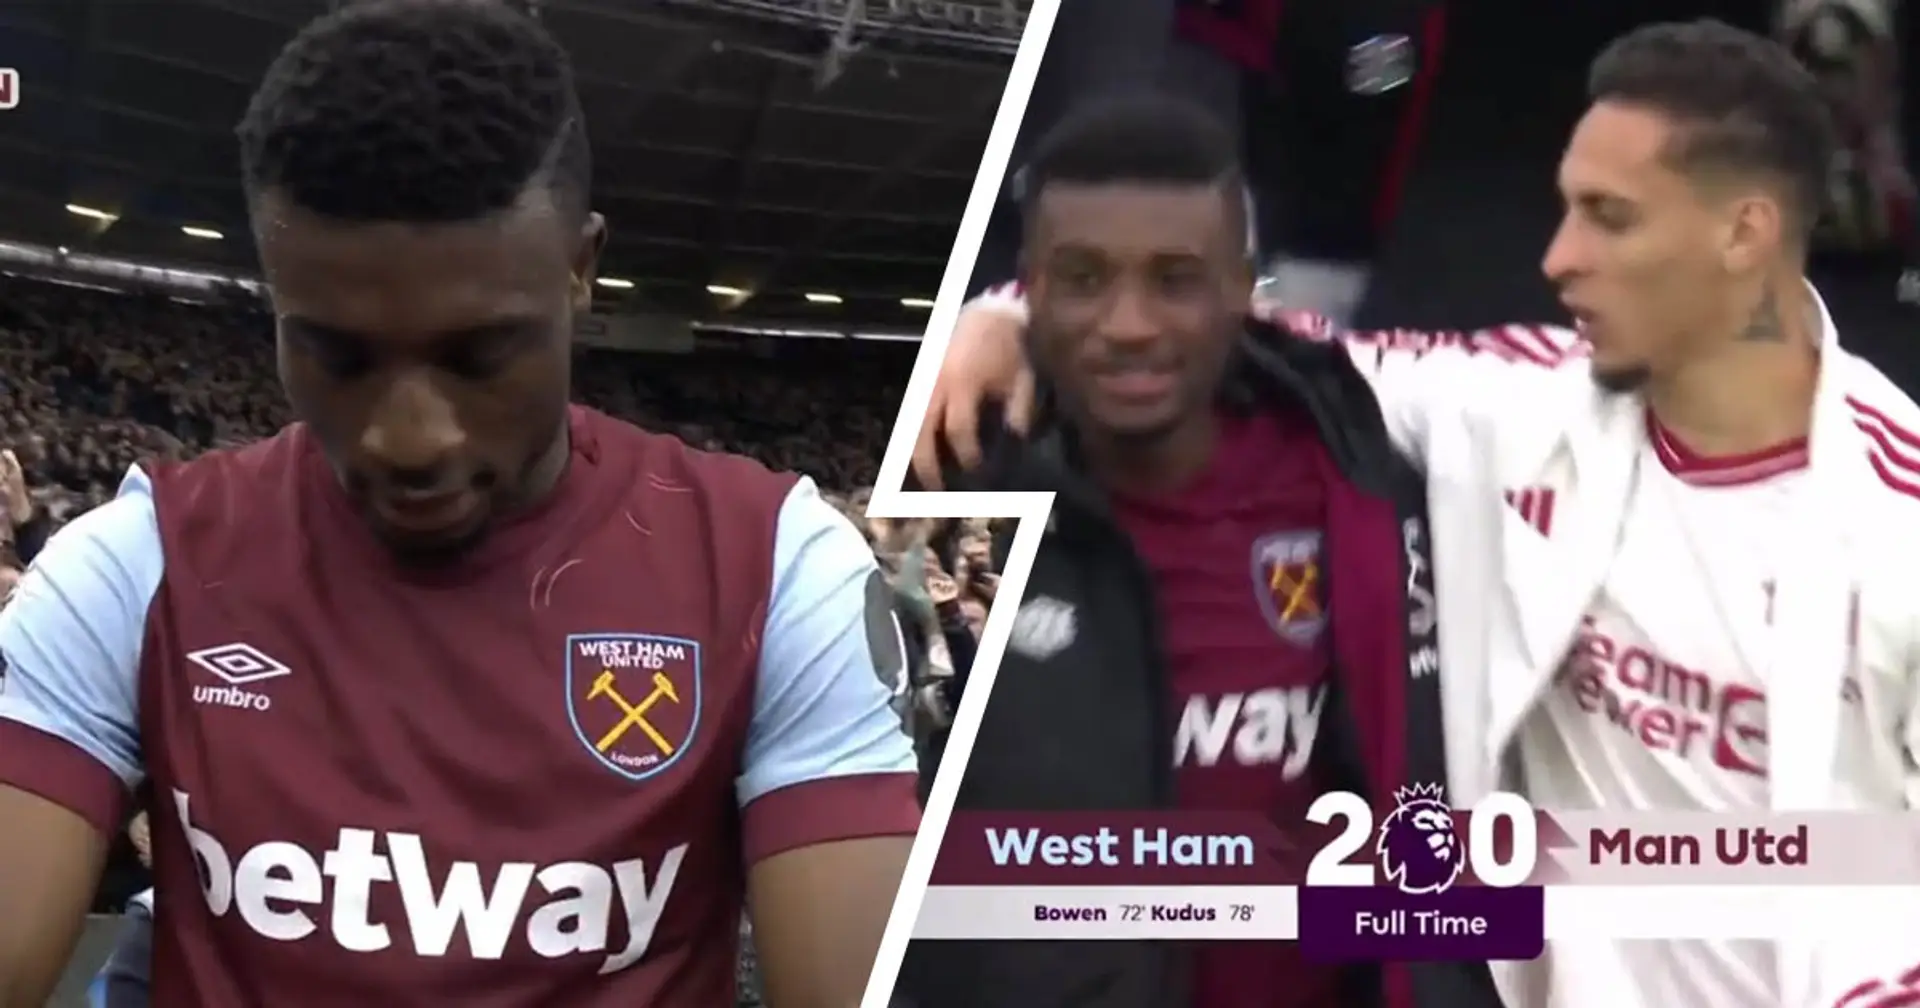 Caught on camera: Antony shares warm embrace with West Ham star Kudus after loss